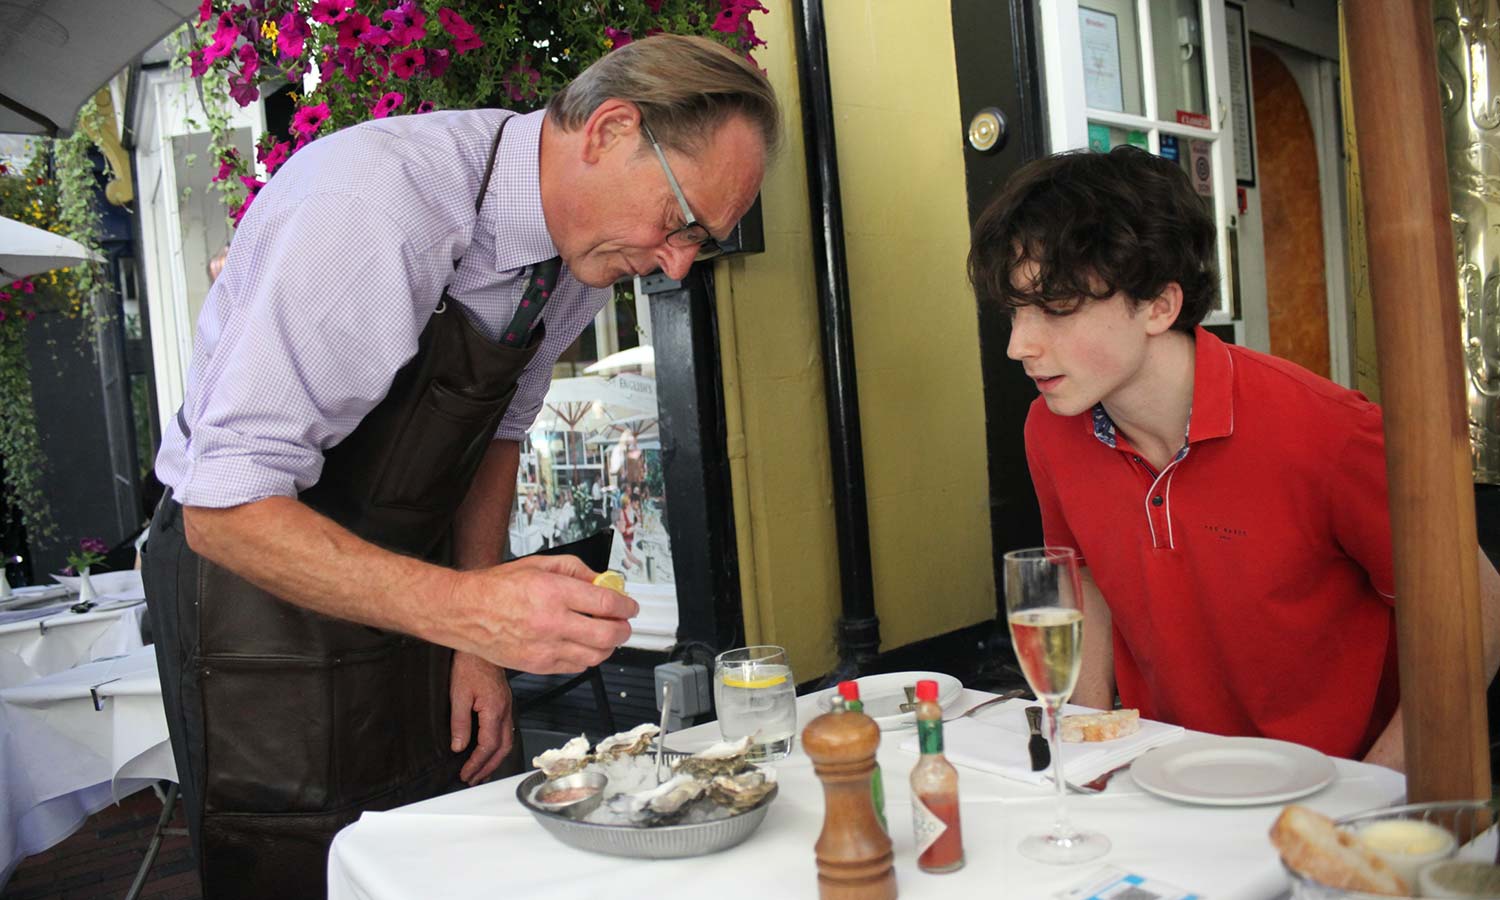 Jonny, The Oysterman, passing his oyster obsession onto a new generation